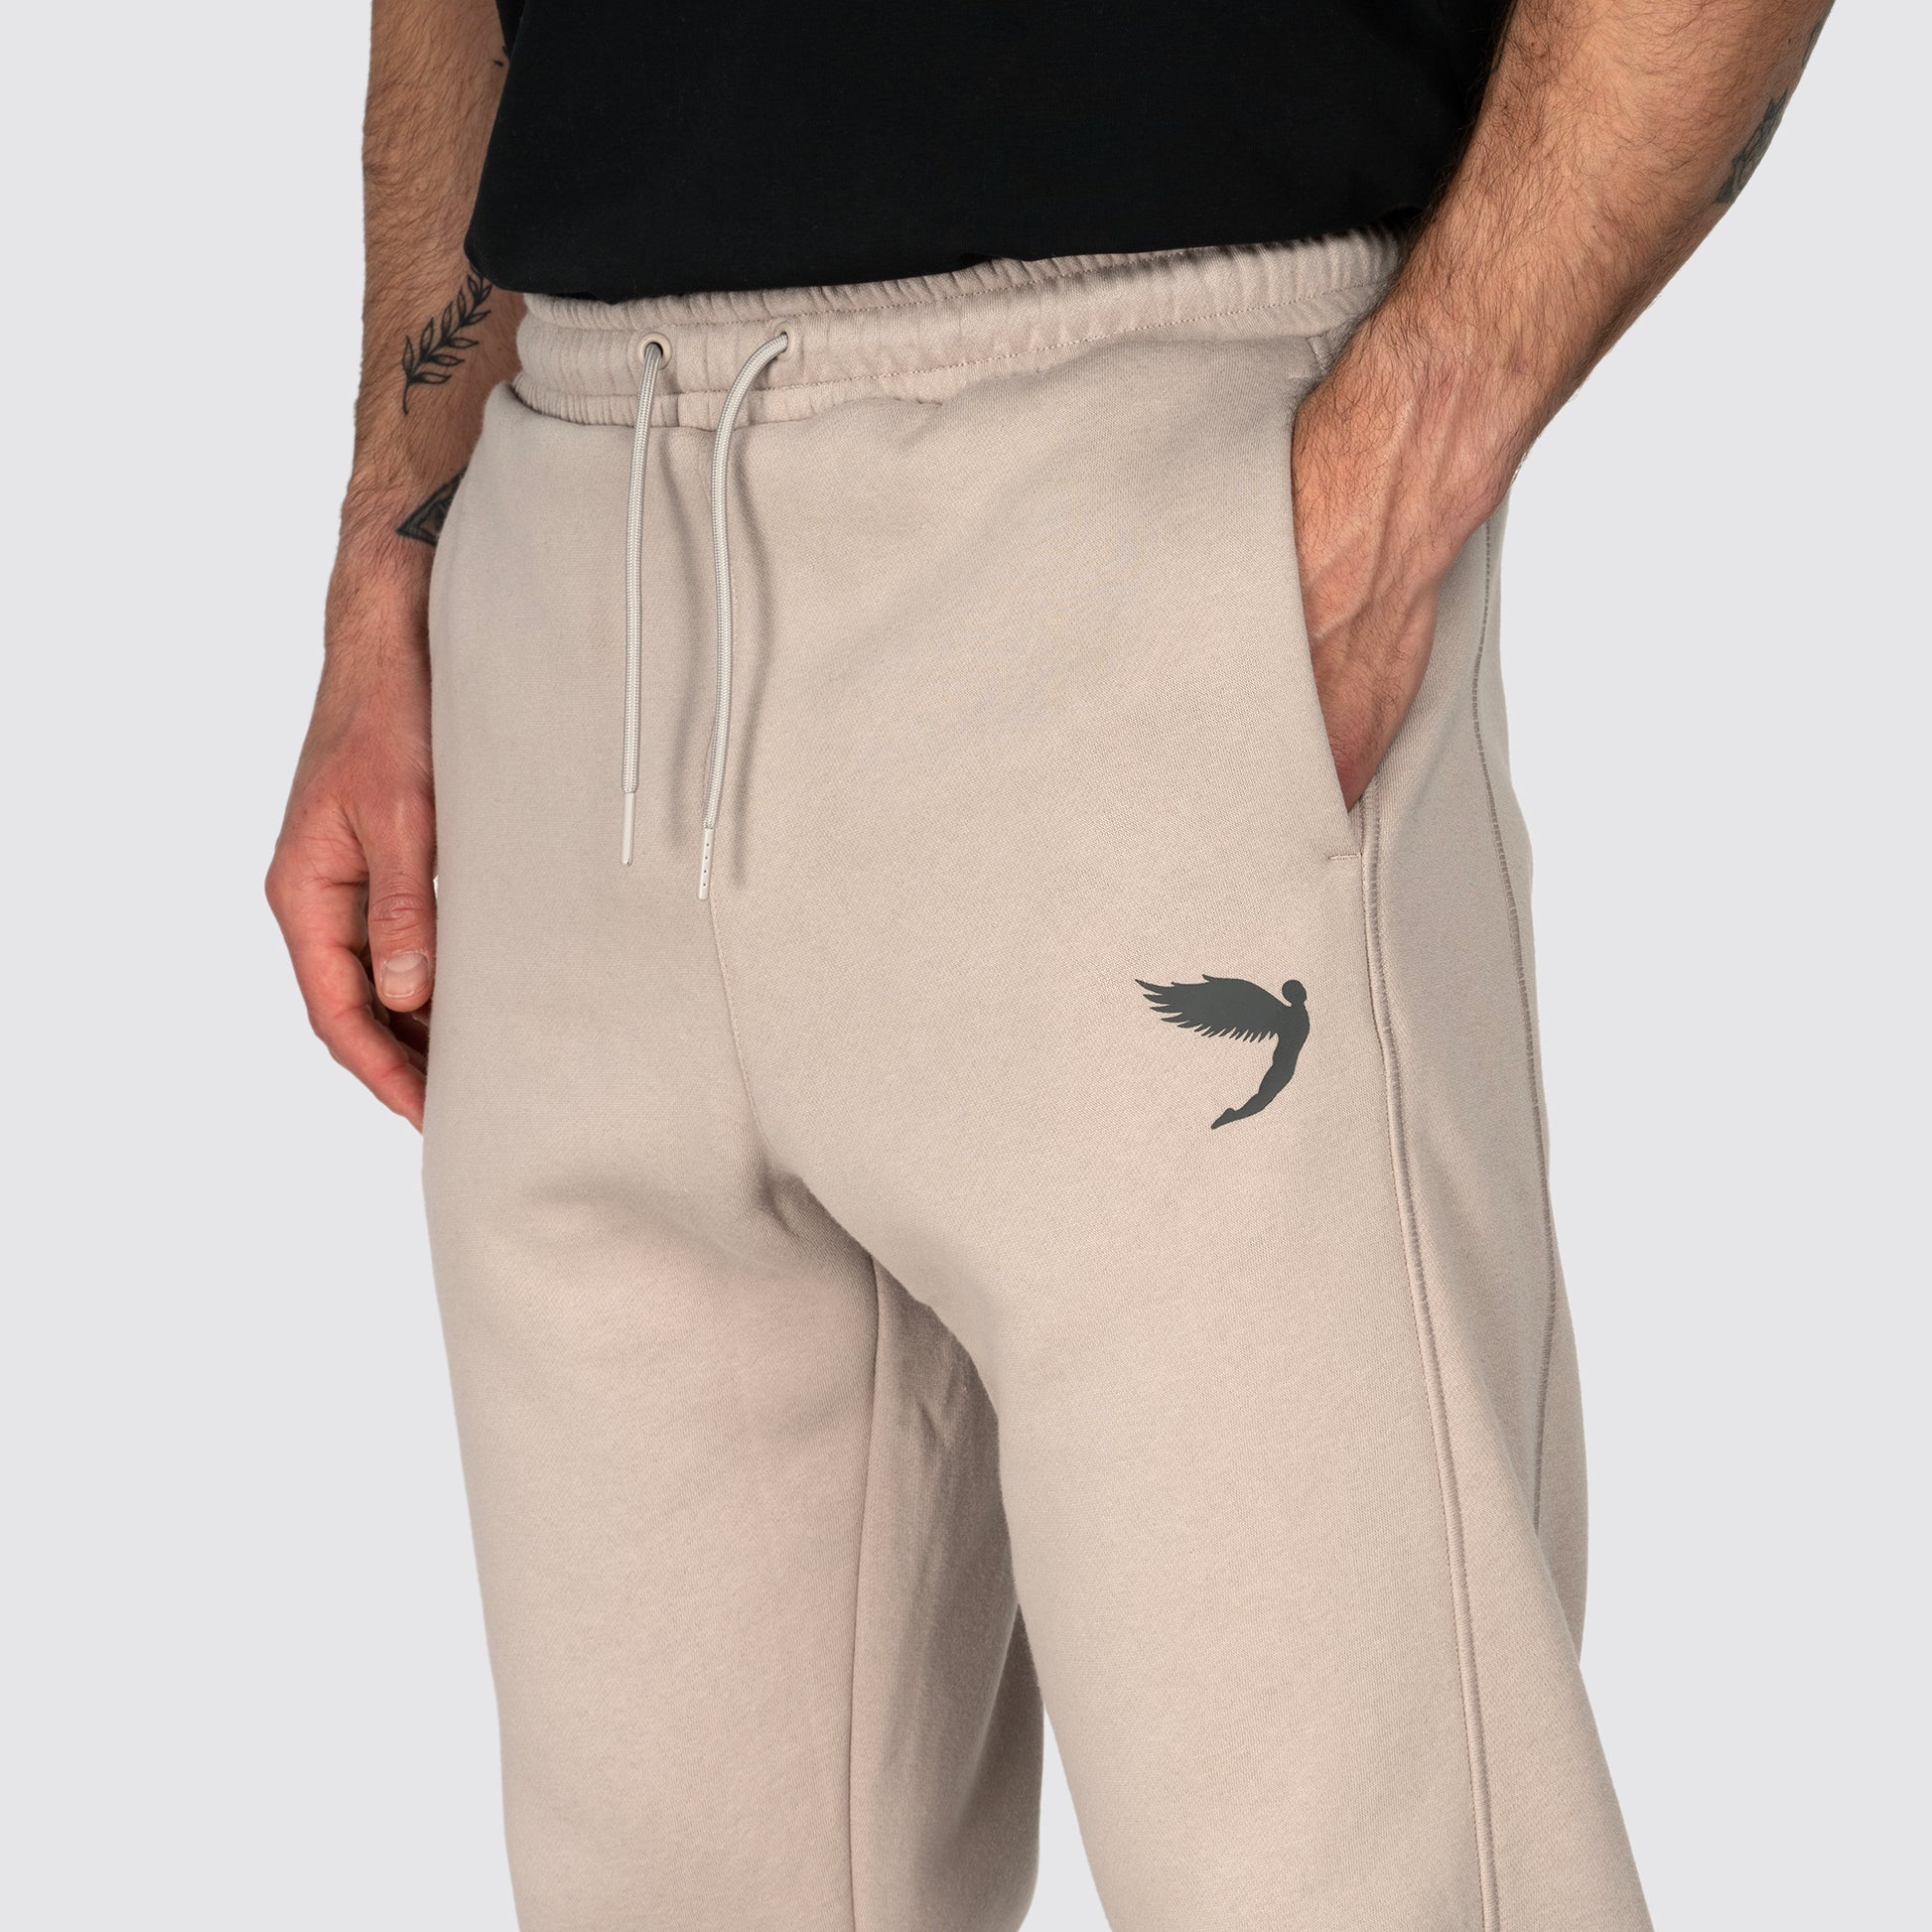 Undisputed Relaxed Fit Joggers (8244016054524)